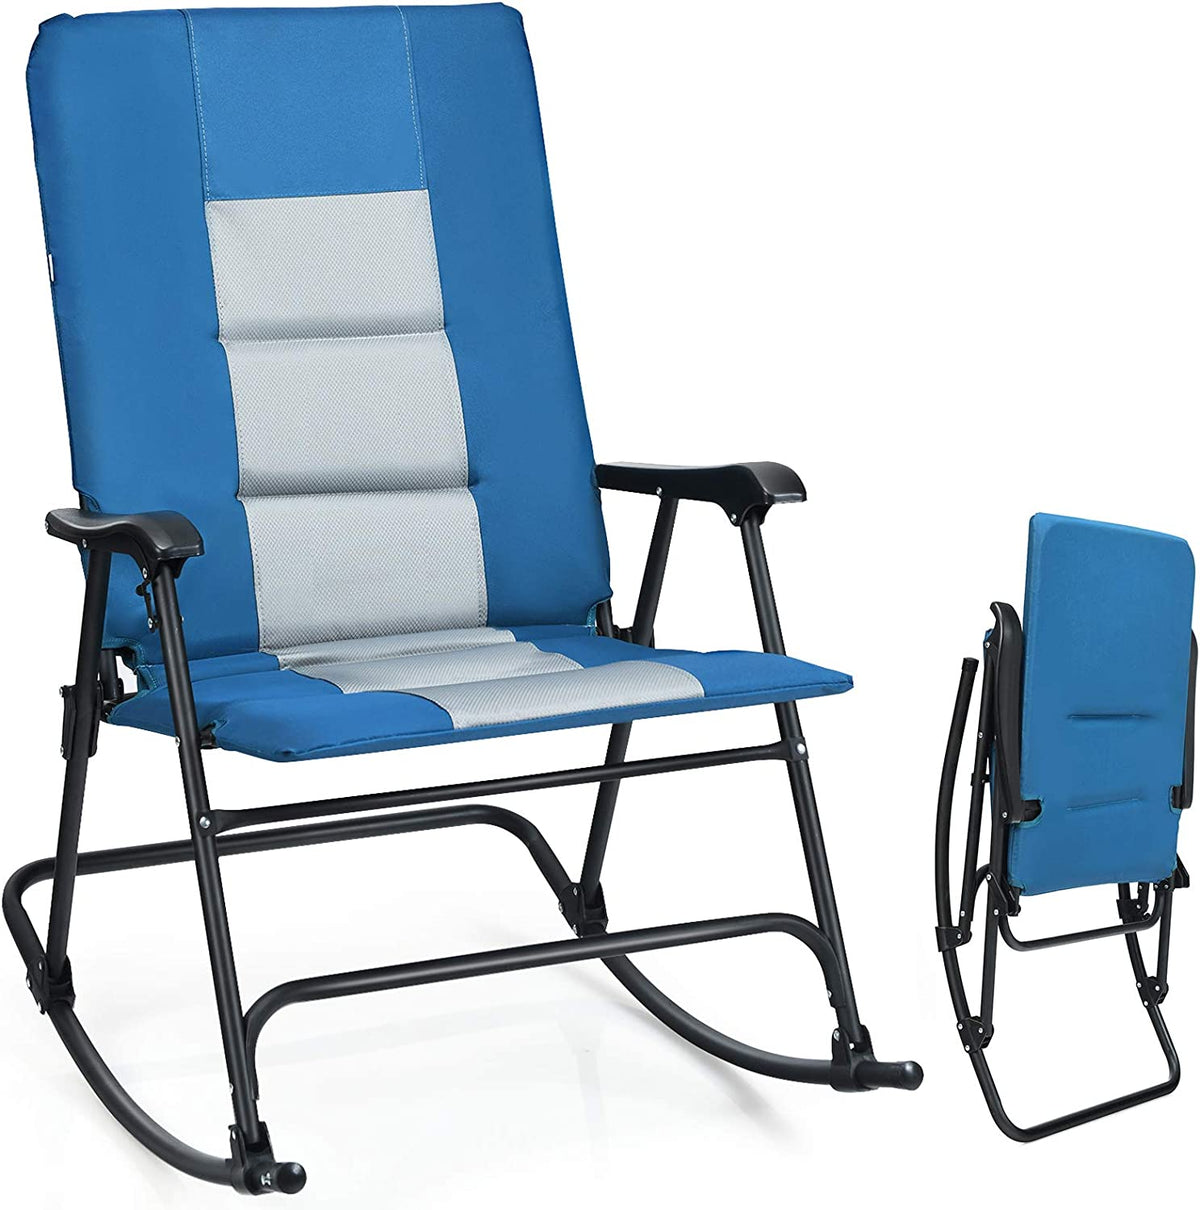 Giantex Foldable Rocking Chair, Oversized Camping Rocking Chair w/High Back & Armrest